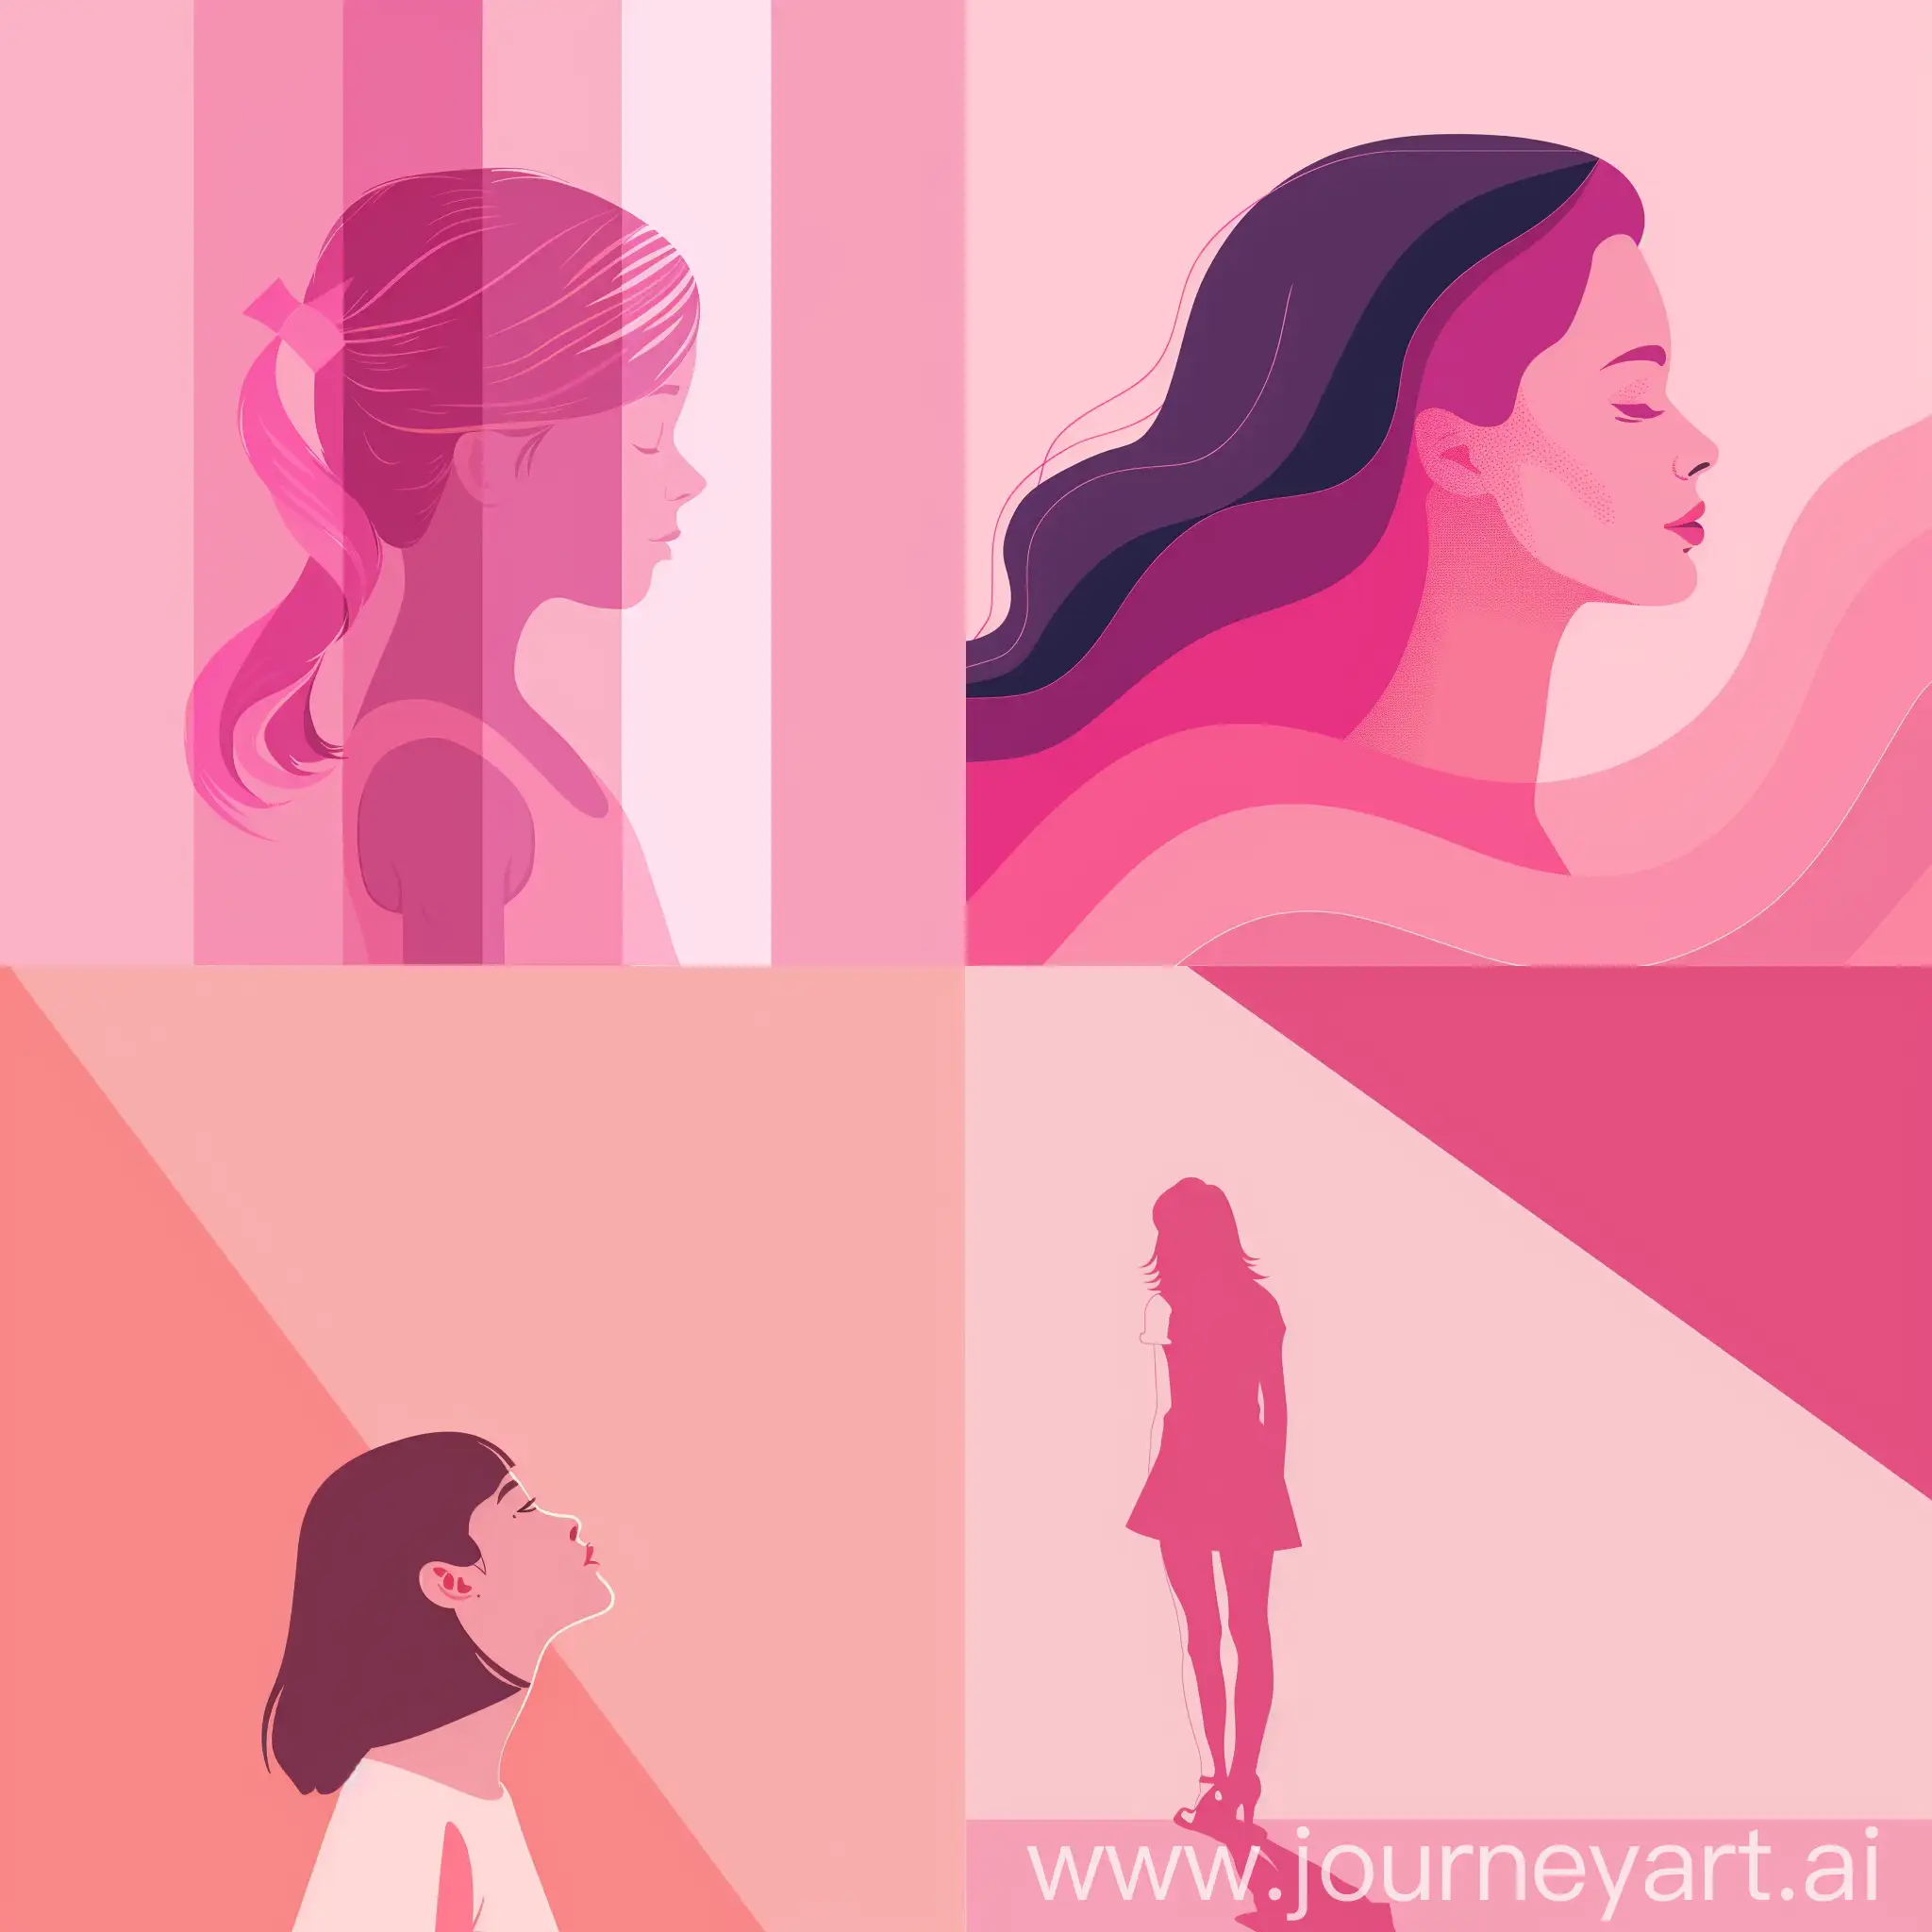 
vector illustration, minimalism, international breast cancer day
illustration of pink shades with a girl